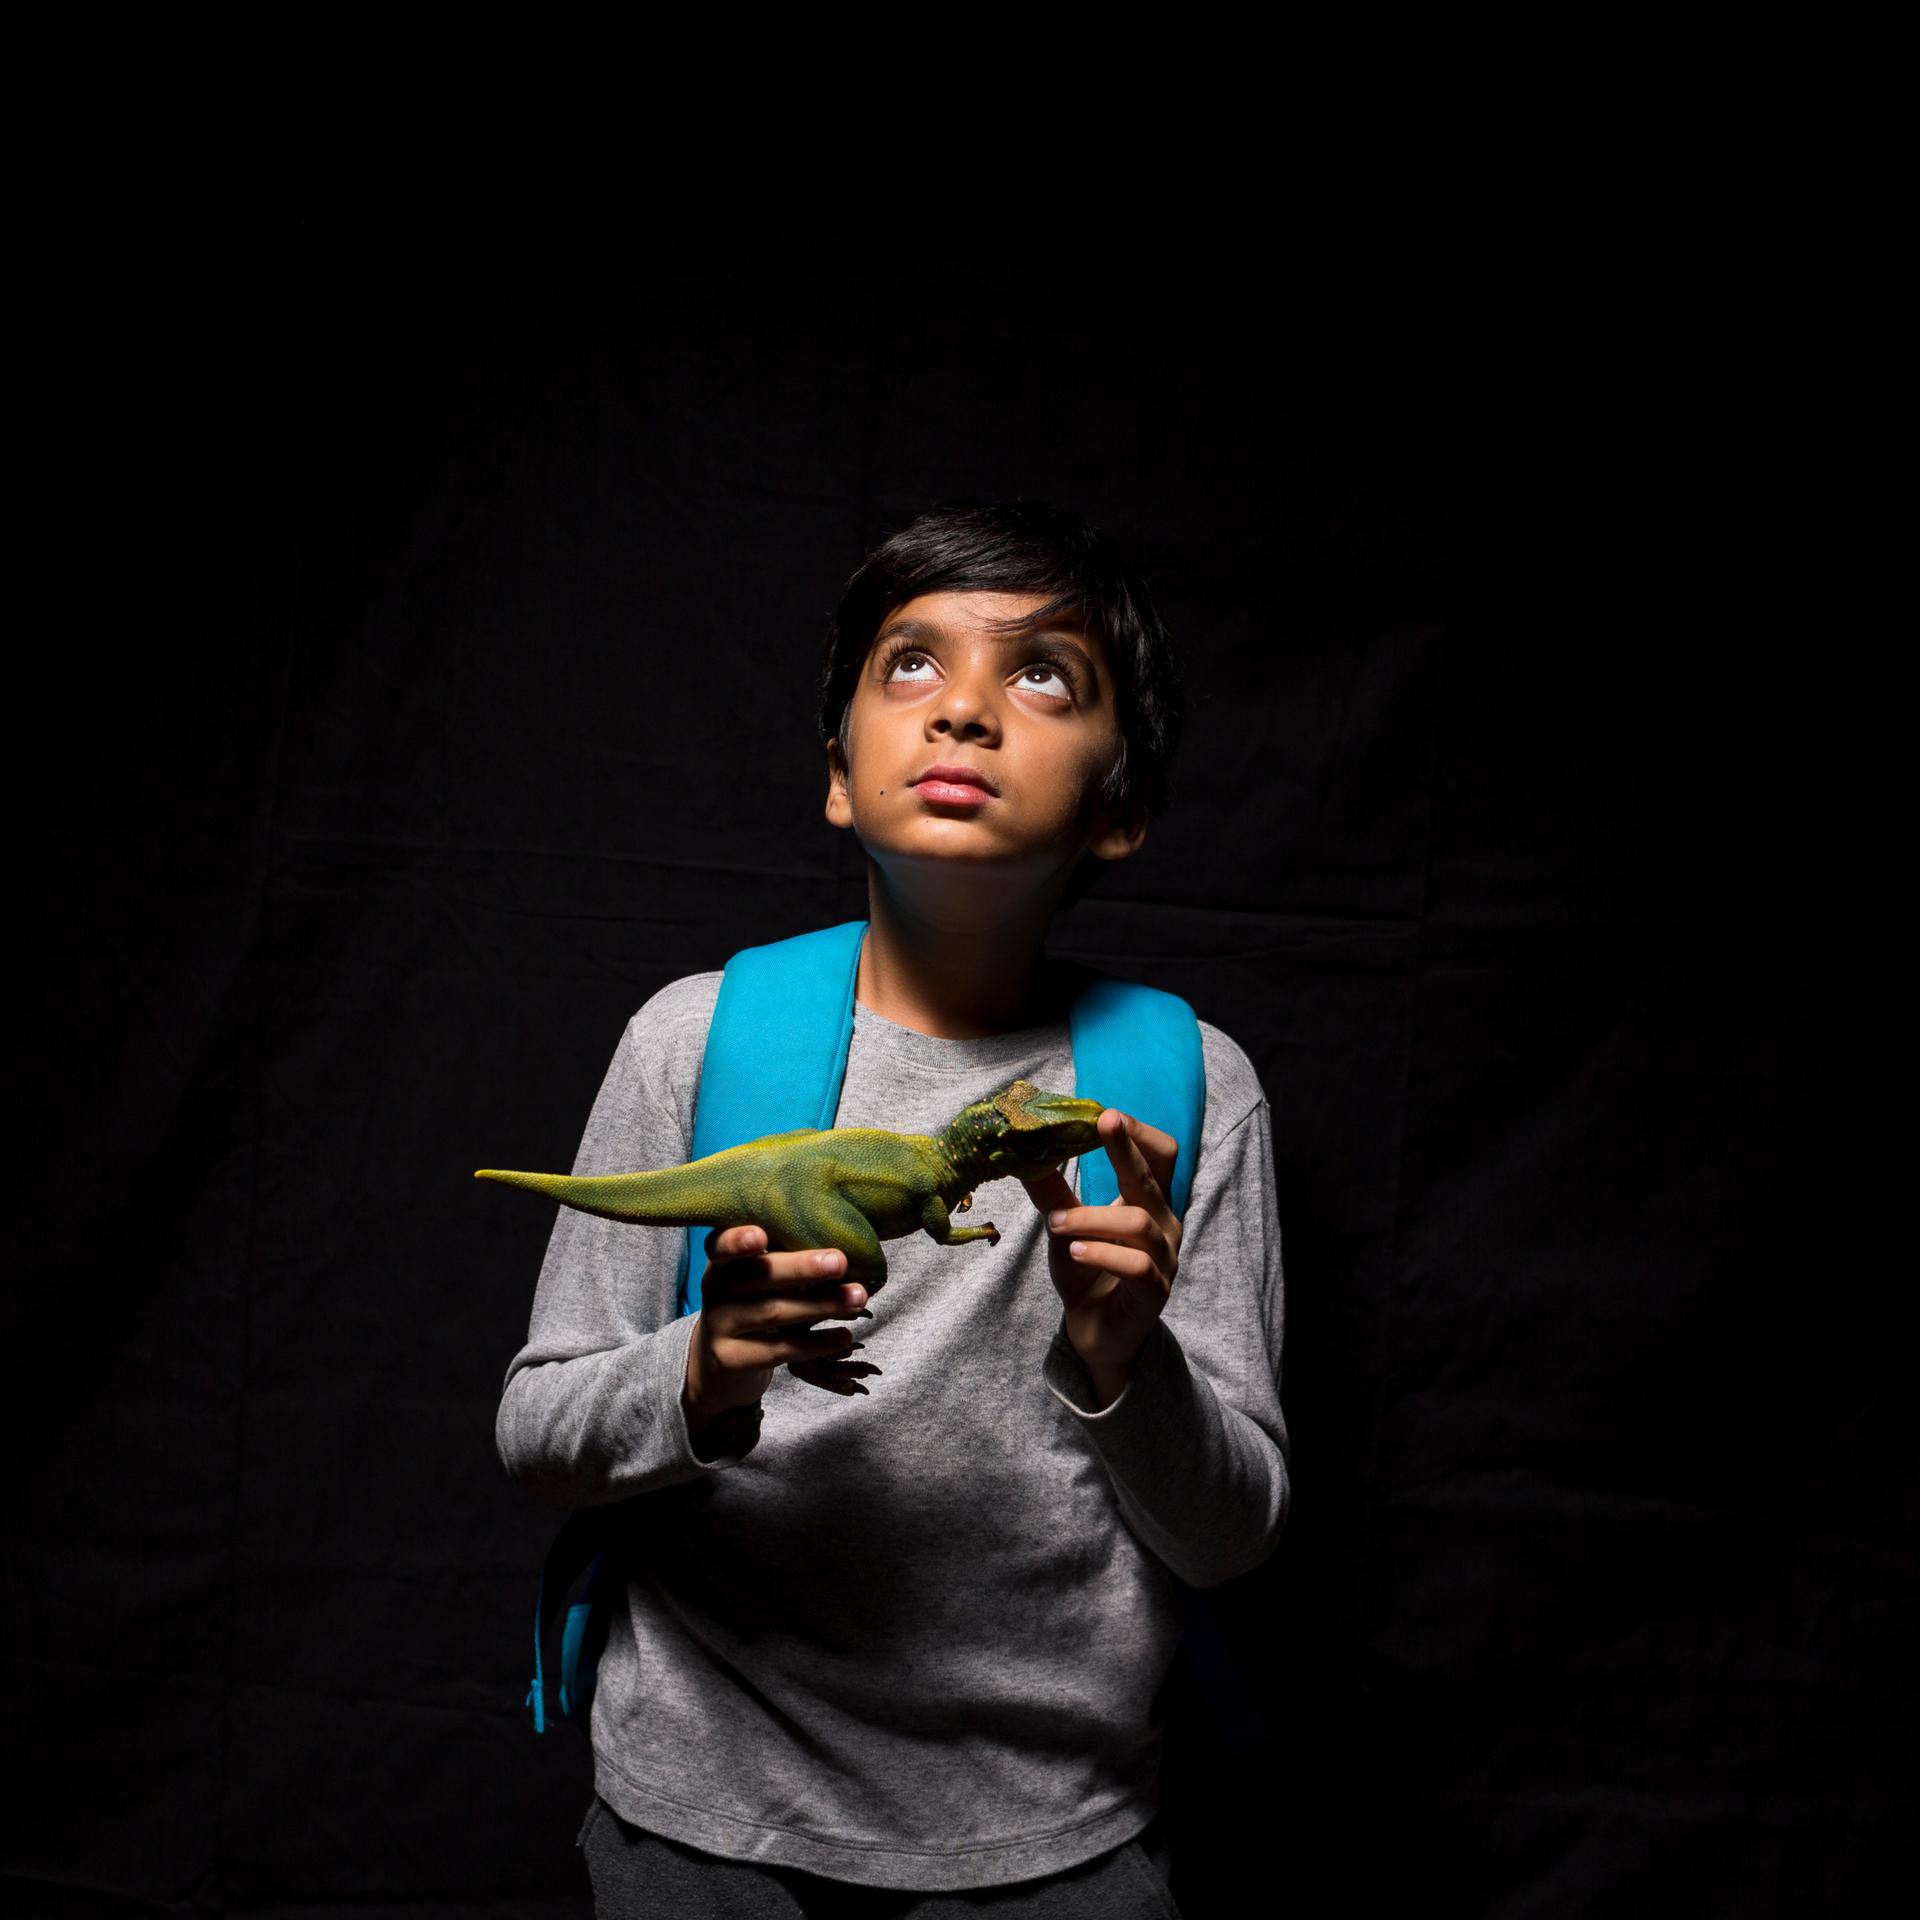 Boy holding toy dinosaur looking up, against black background